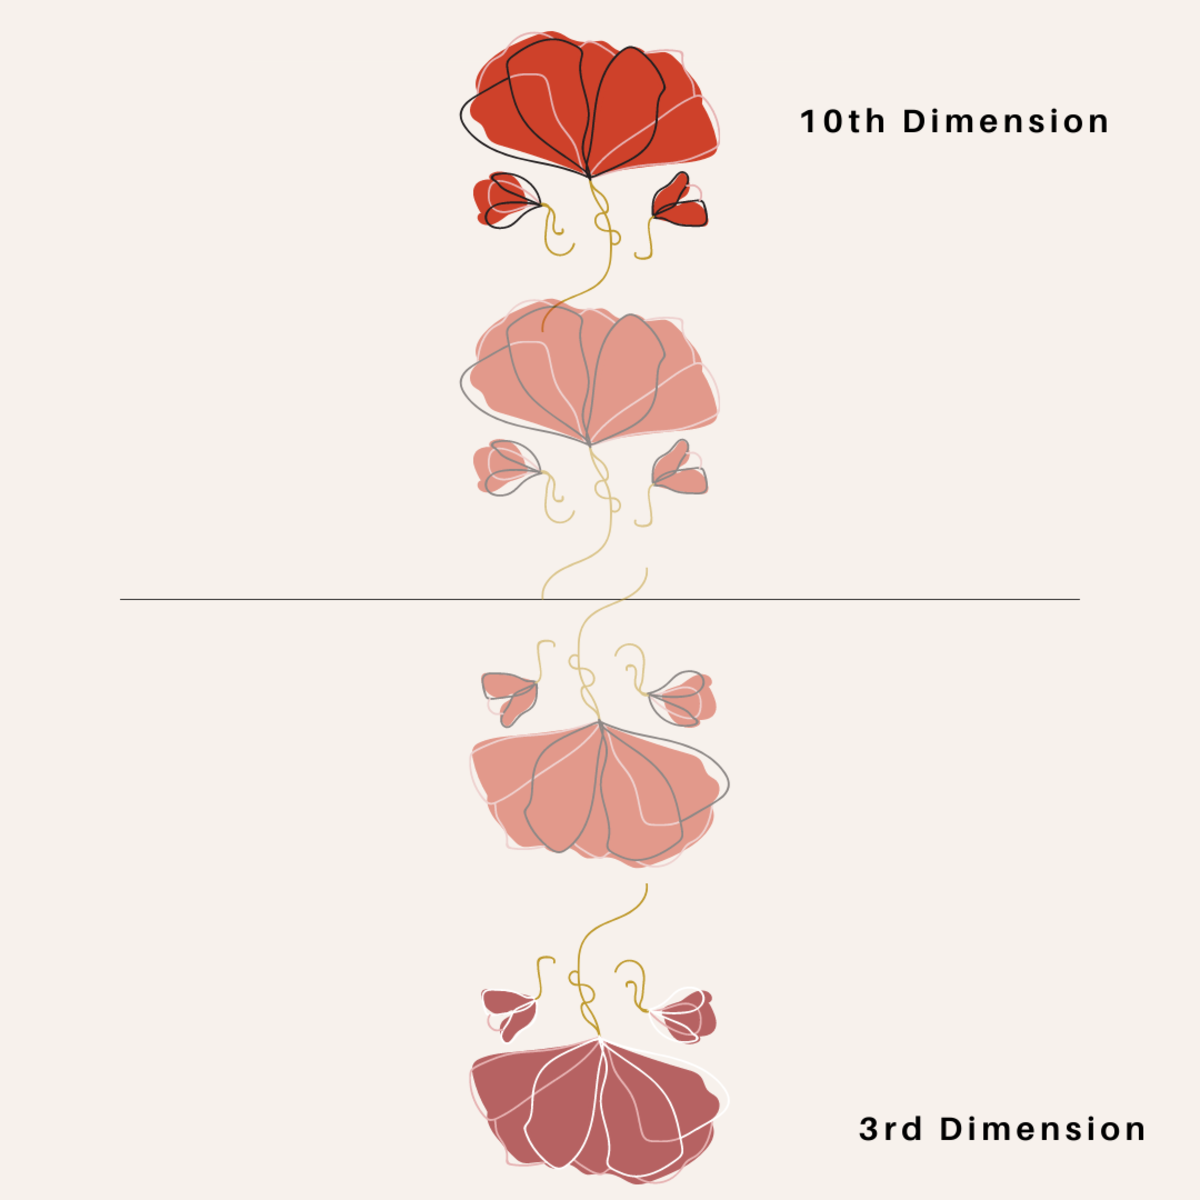 How the distortion filter works from the 10th dimension down to the 3rd dimension.